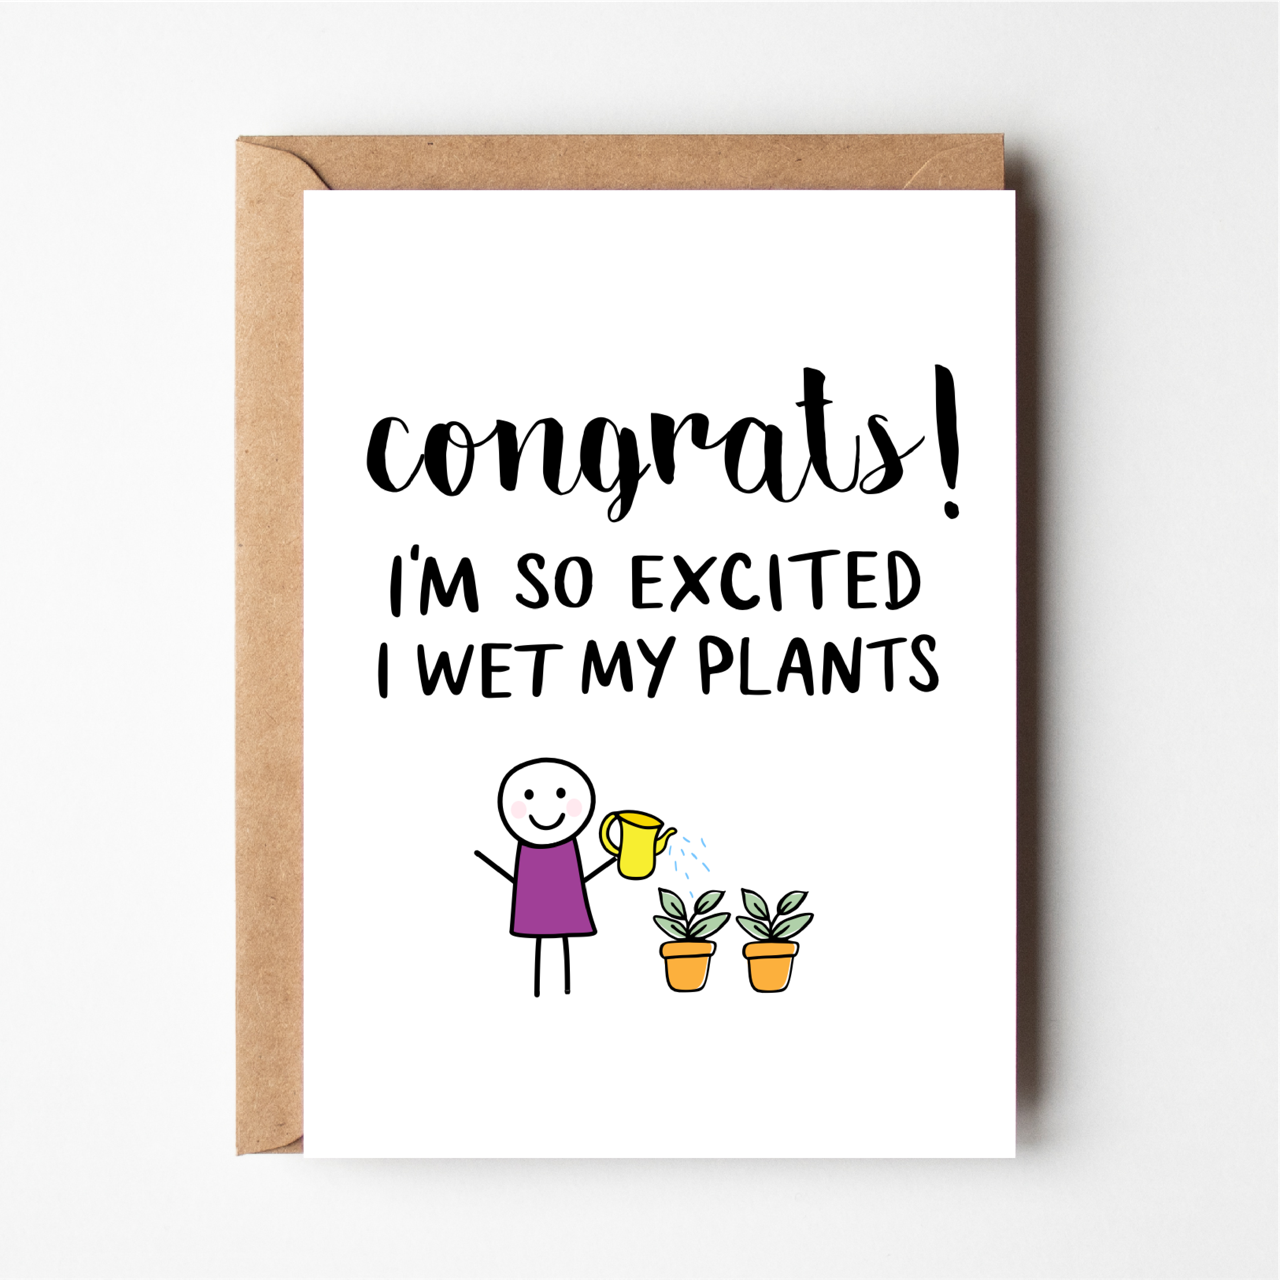 Congrats! I'm so excited I wet my plants